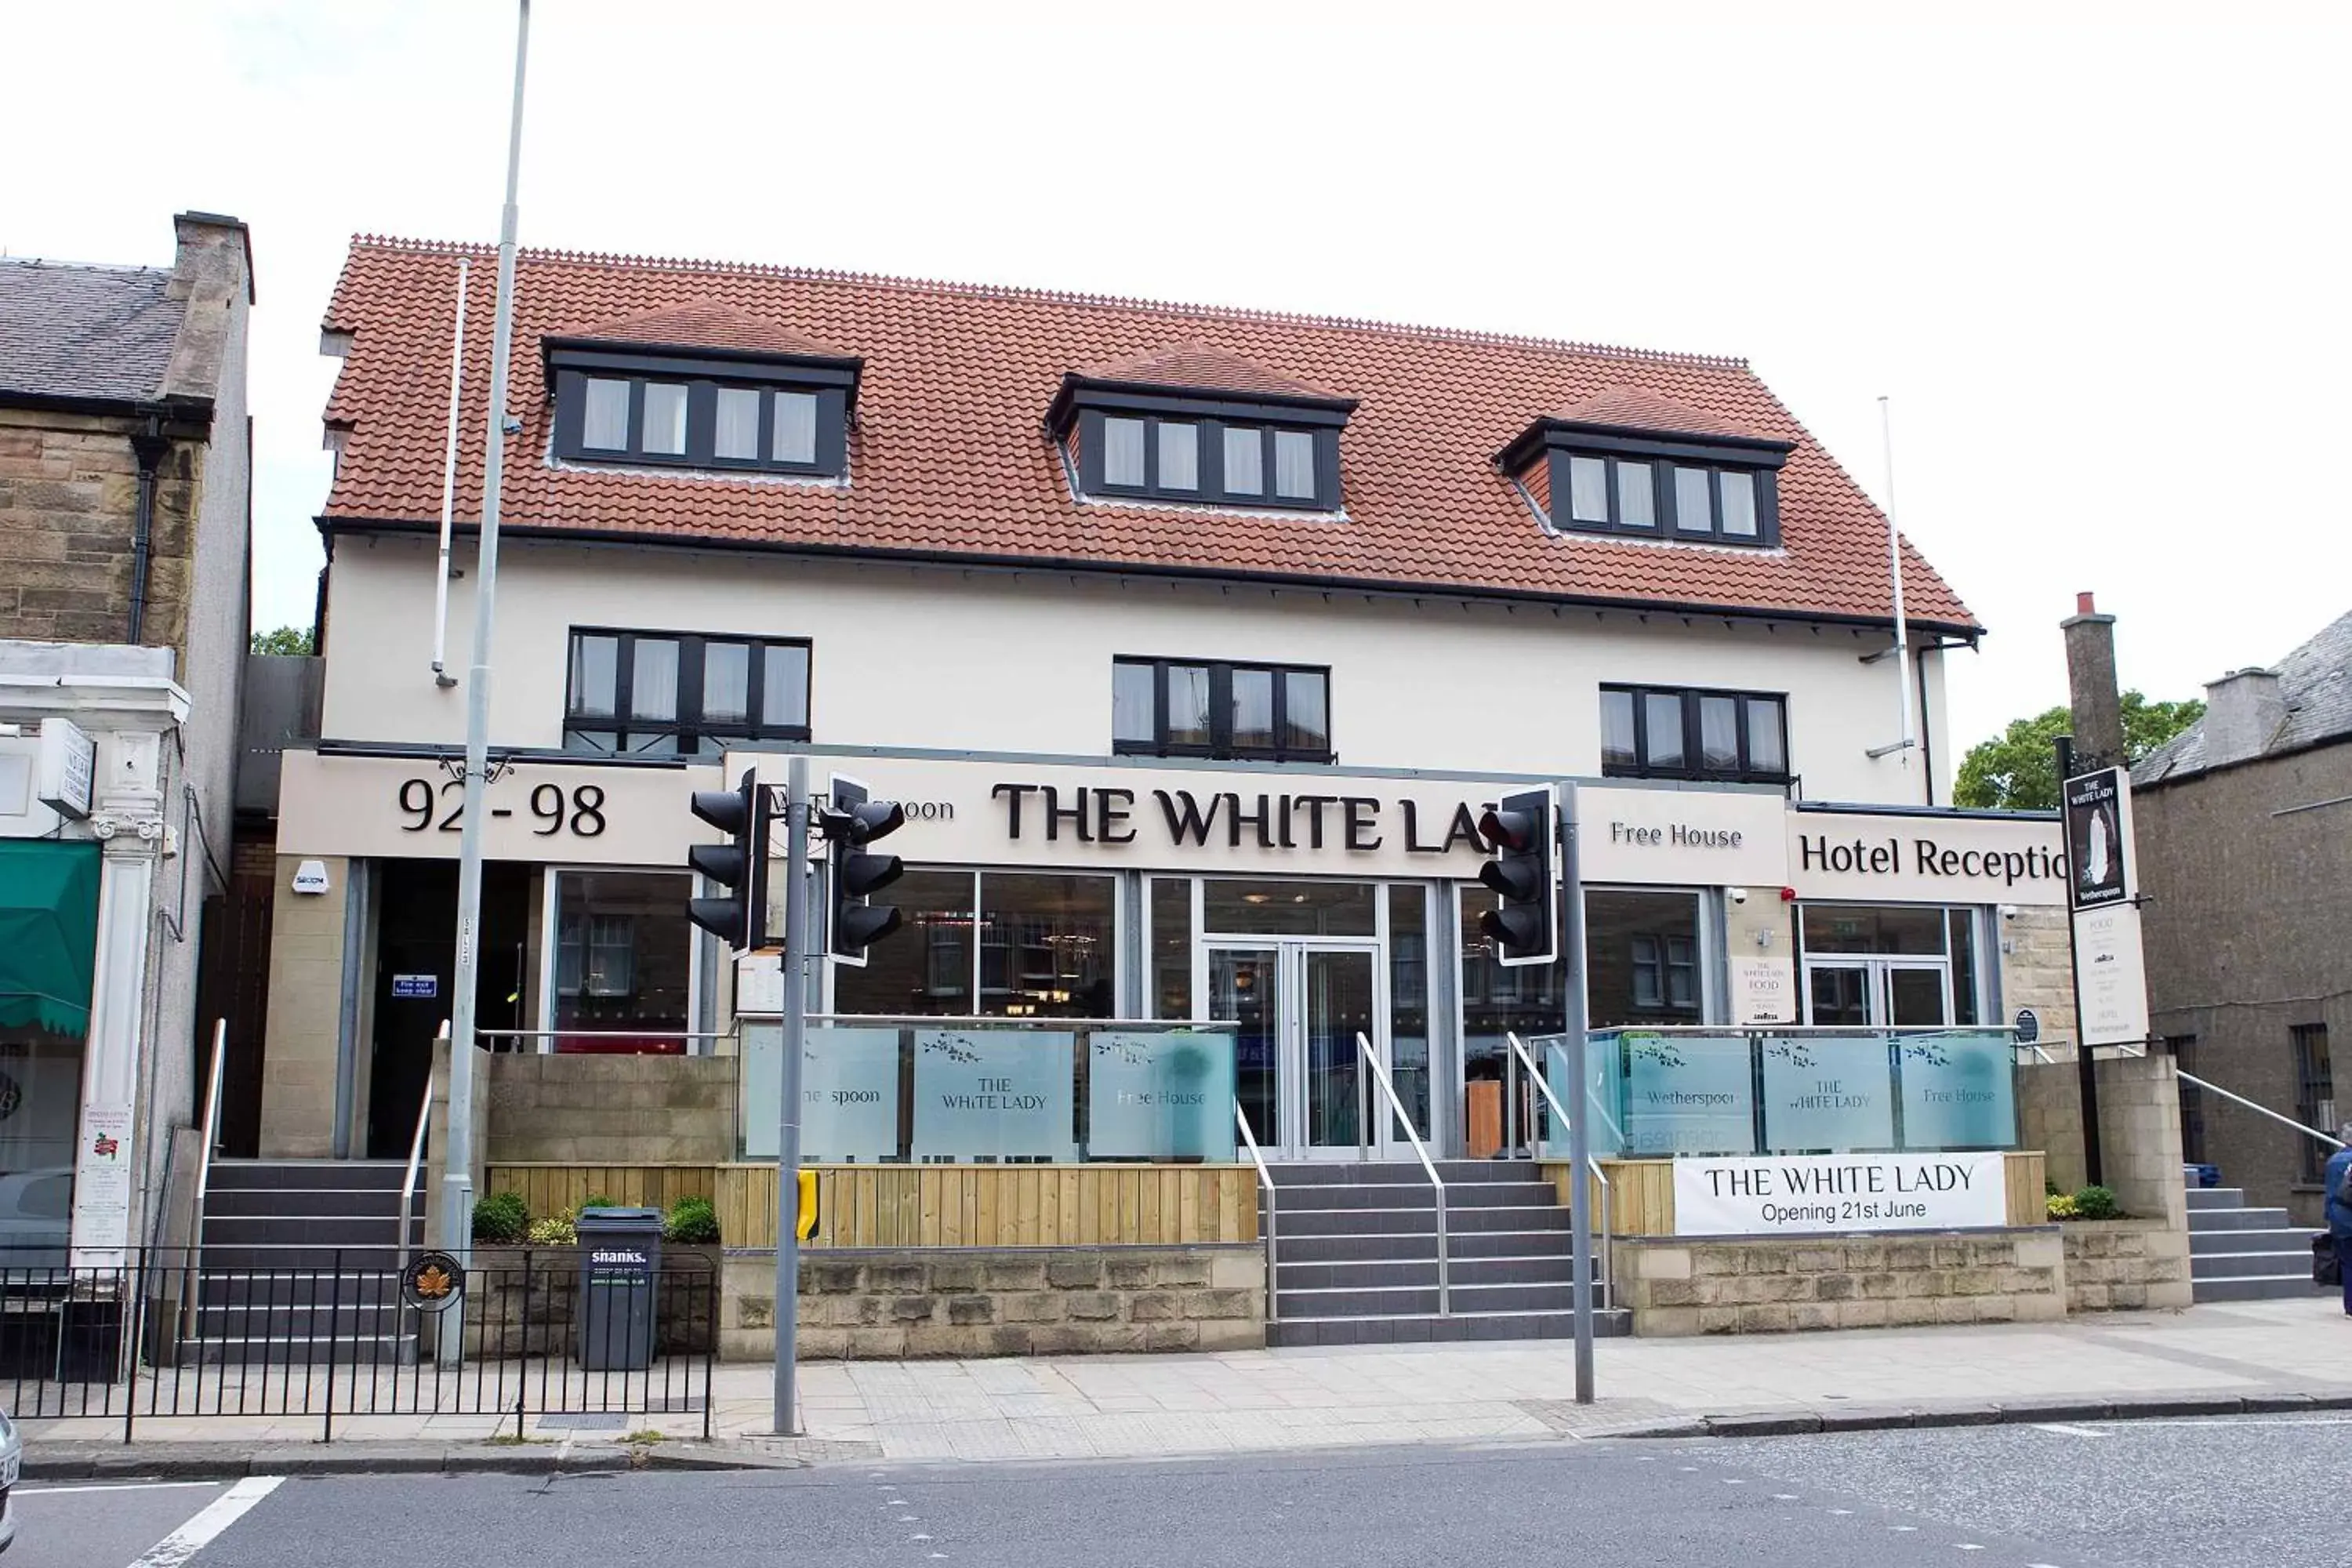 Facade/entrance in The White Lady Wetherspoon